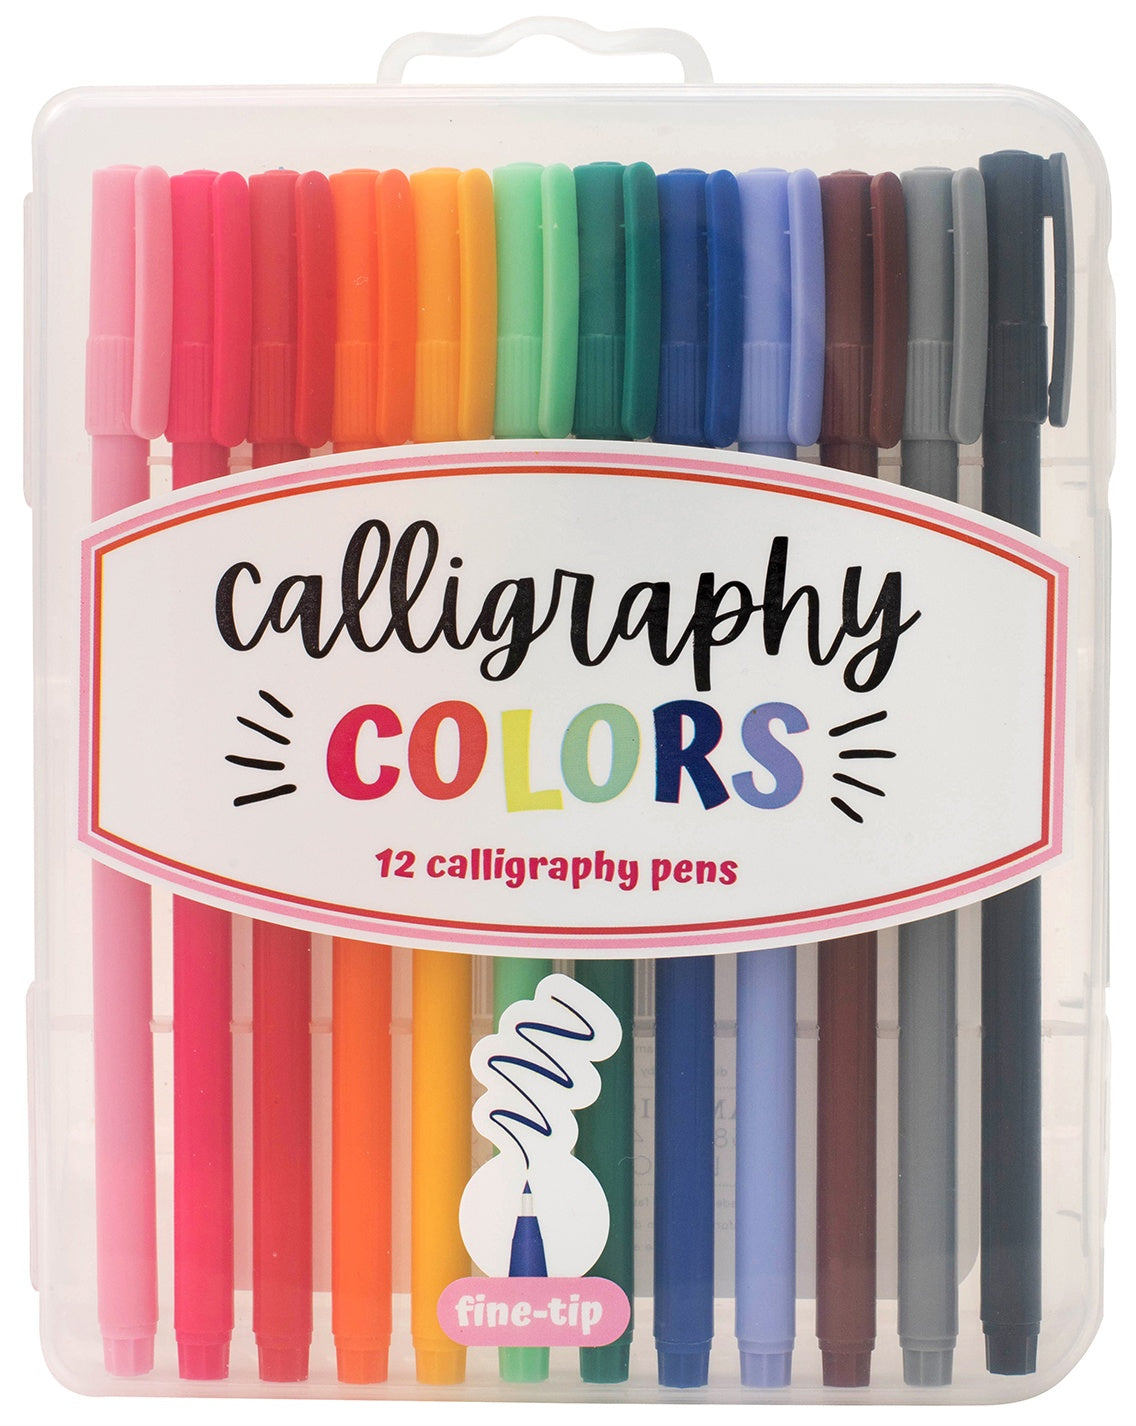 American Crafts Calligraphy Pens